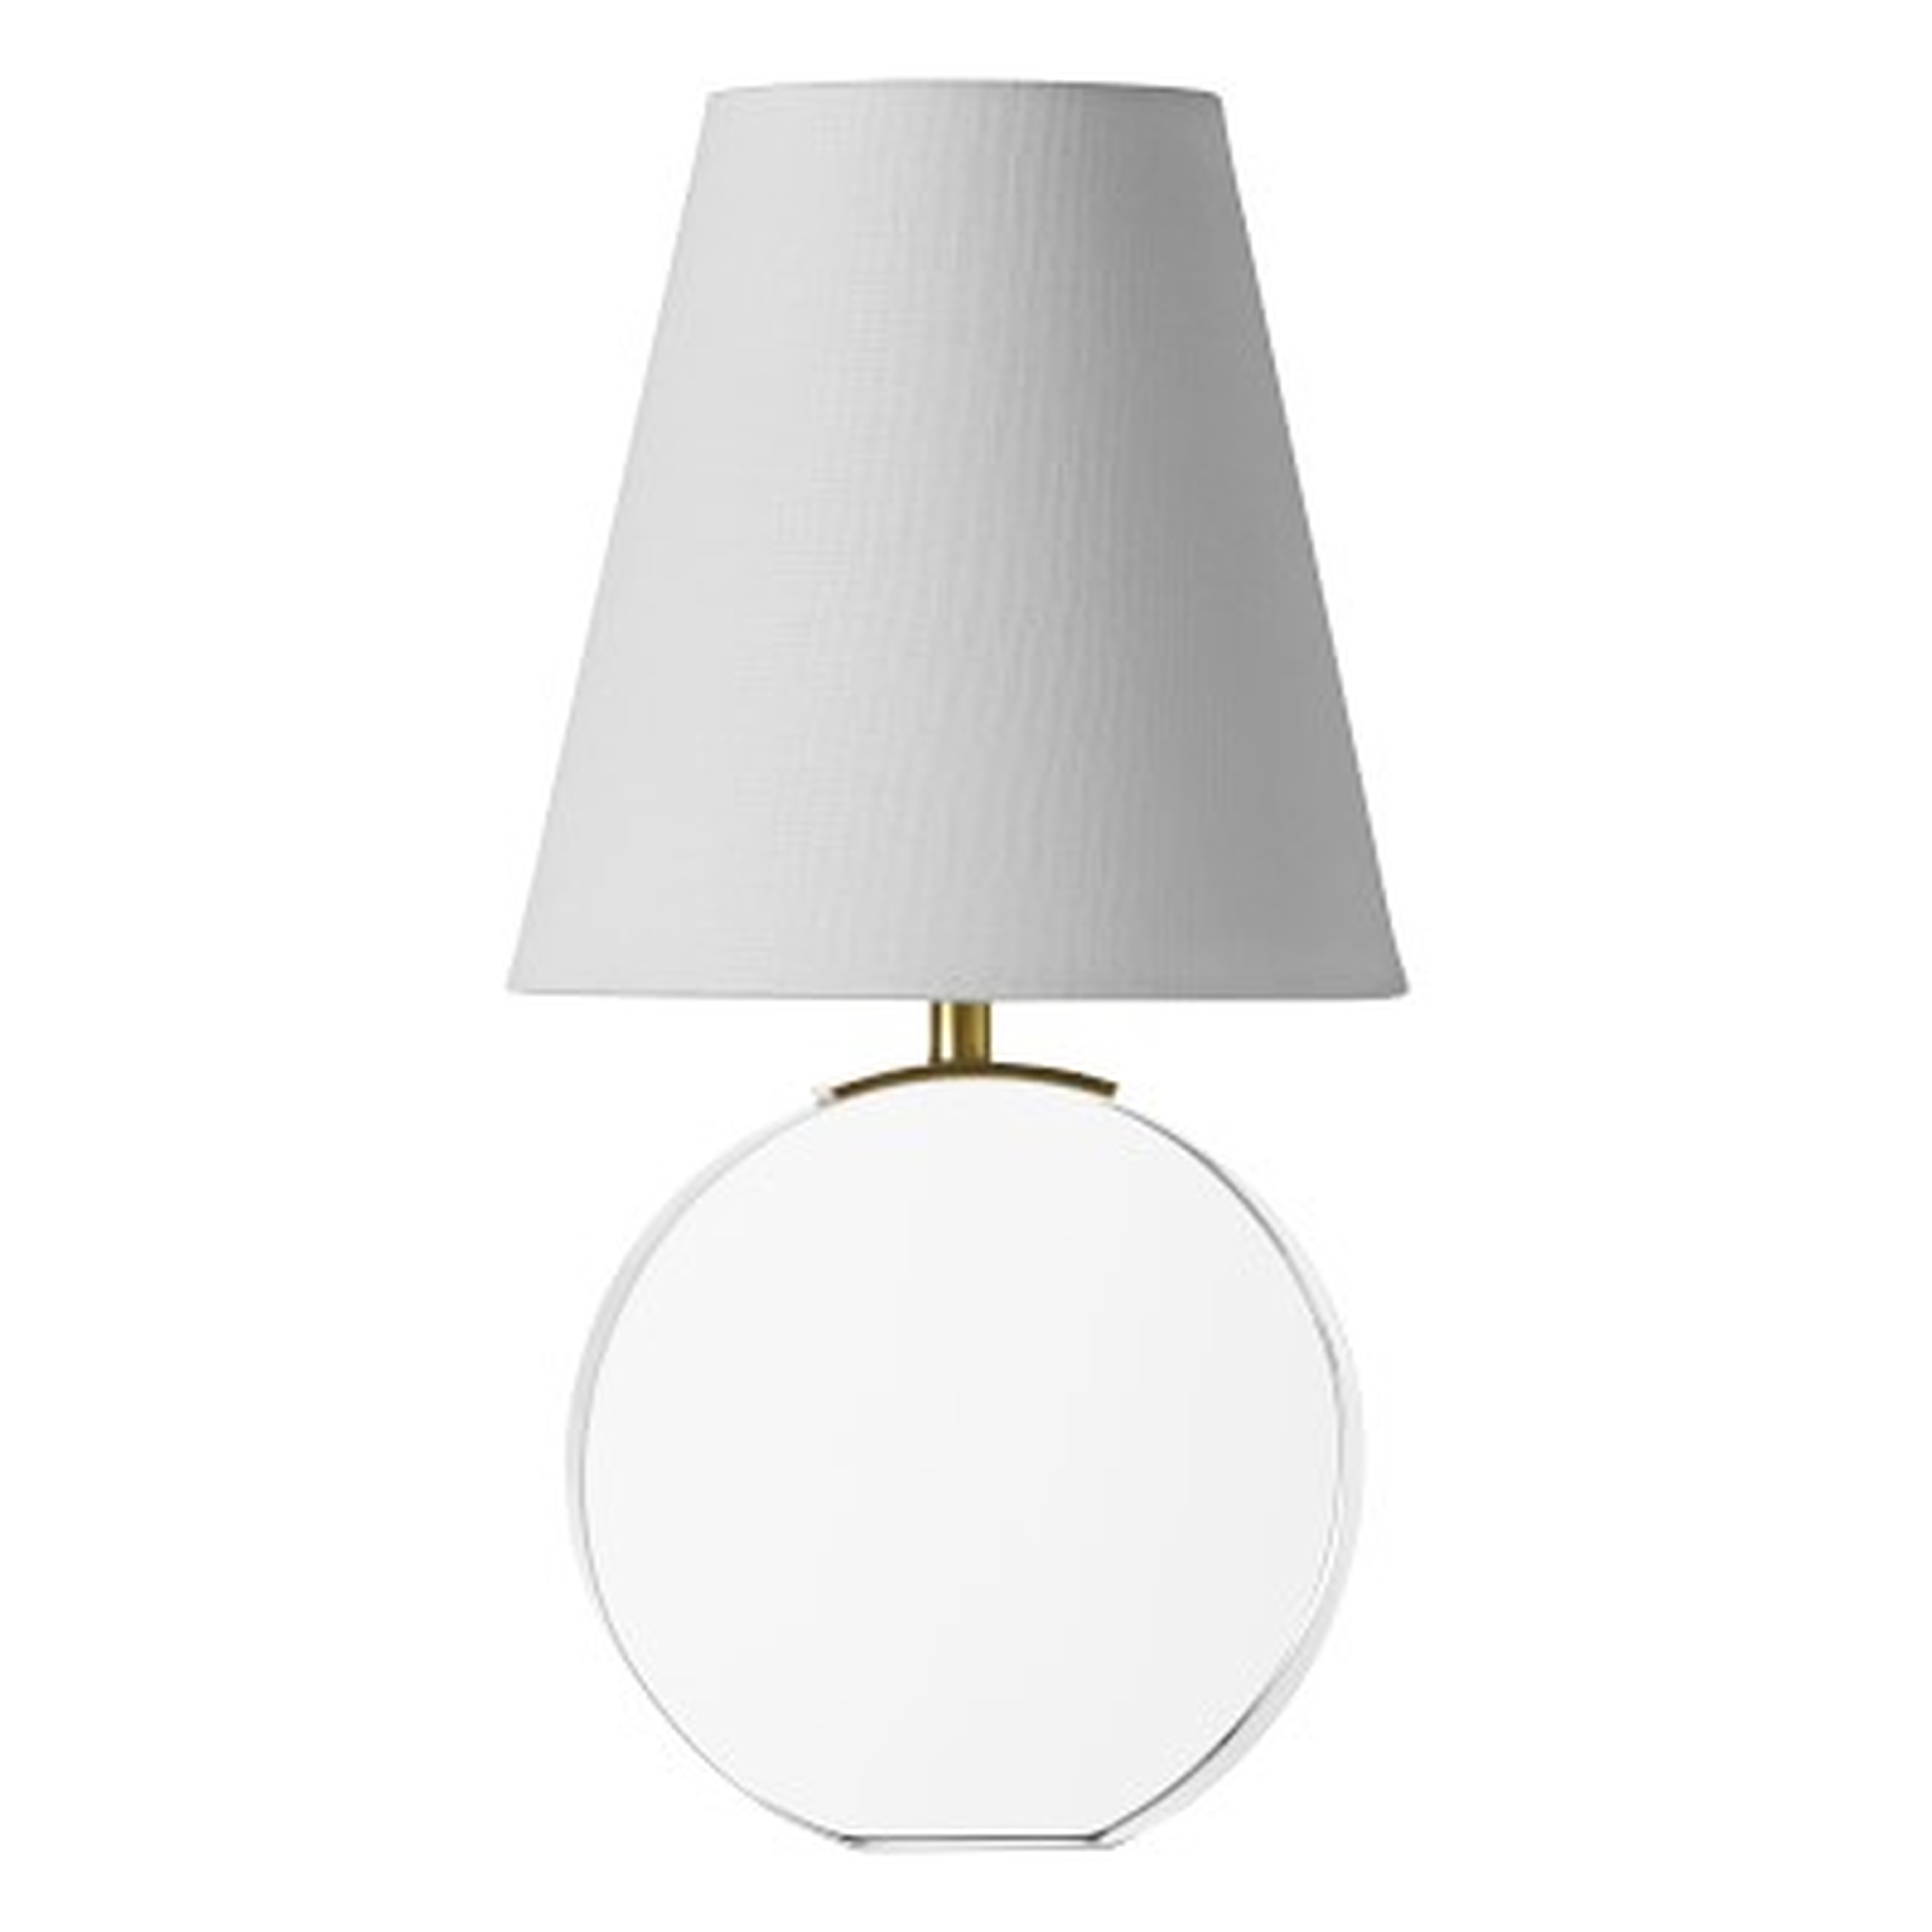 Crystal Disk Table Lamp - Williams Sonoma